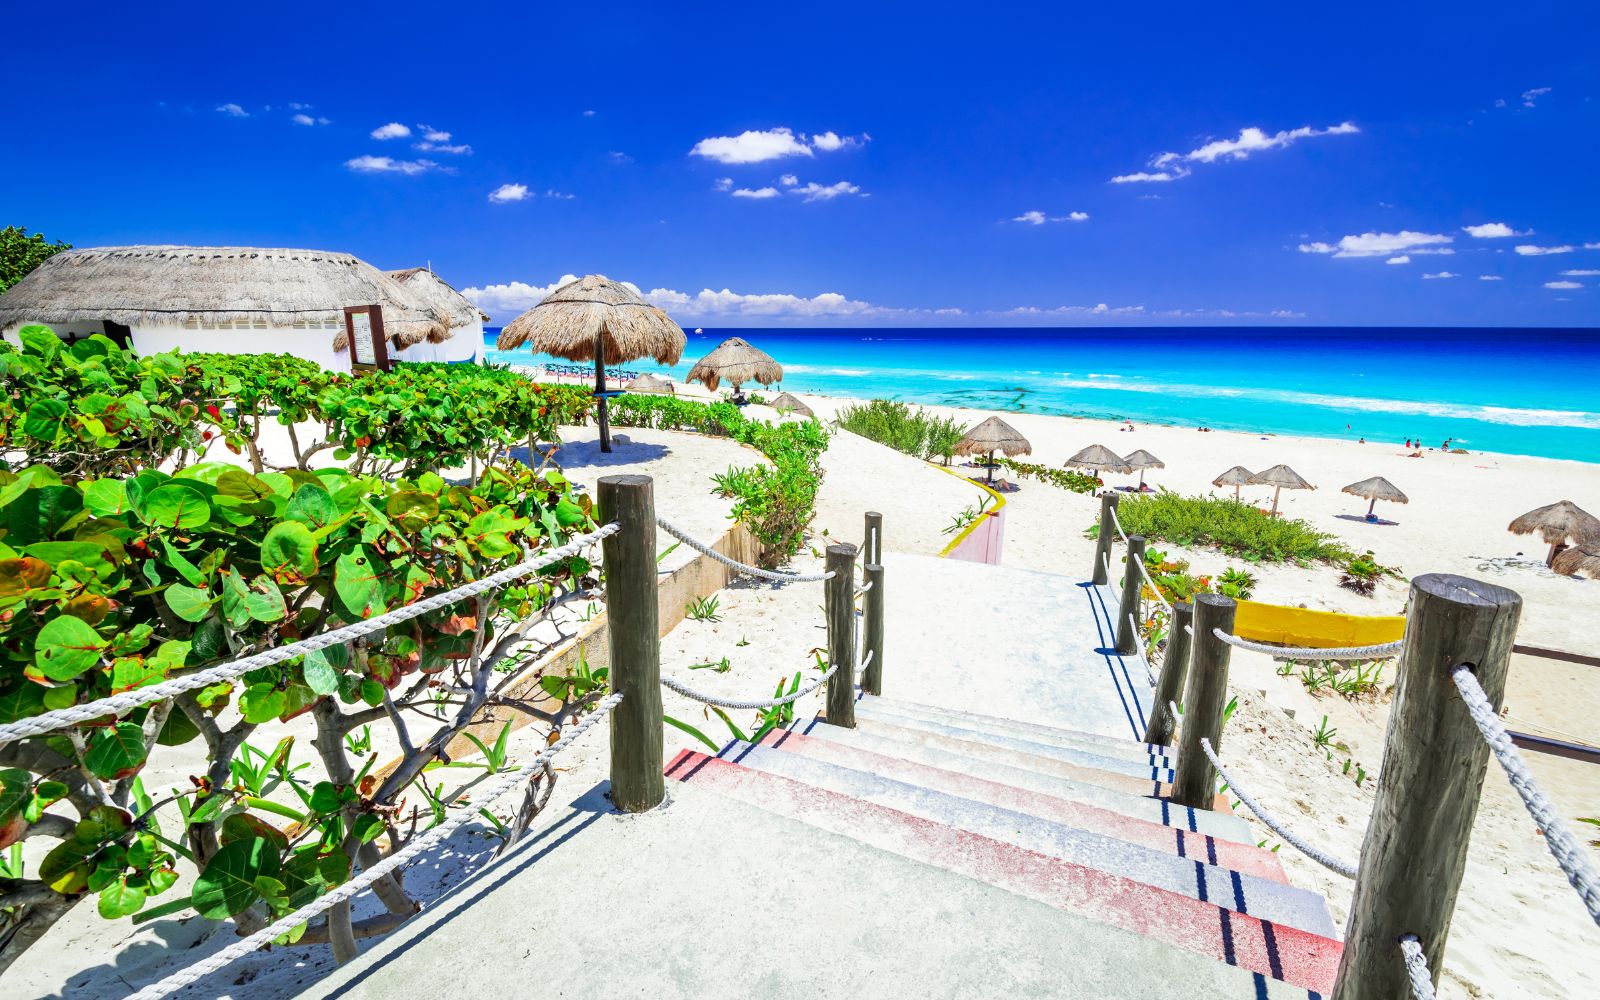 5 Reasons Why Cancun Is Americans’ No. 1 Vacation Spot This Winter